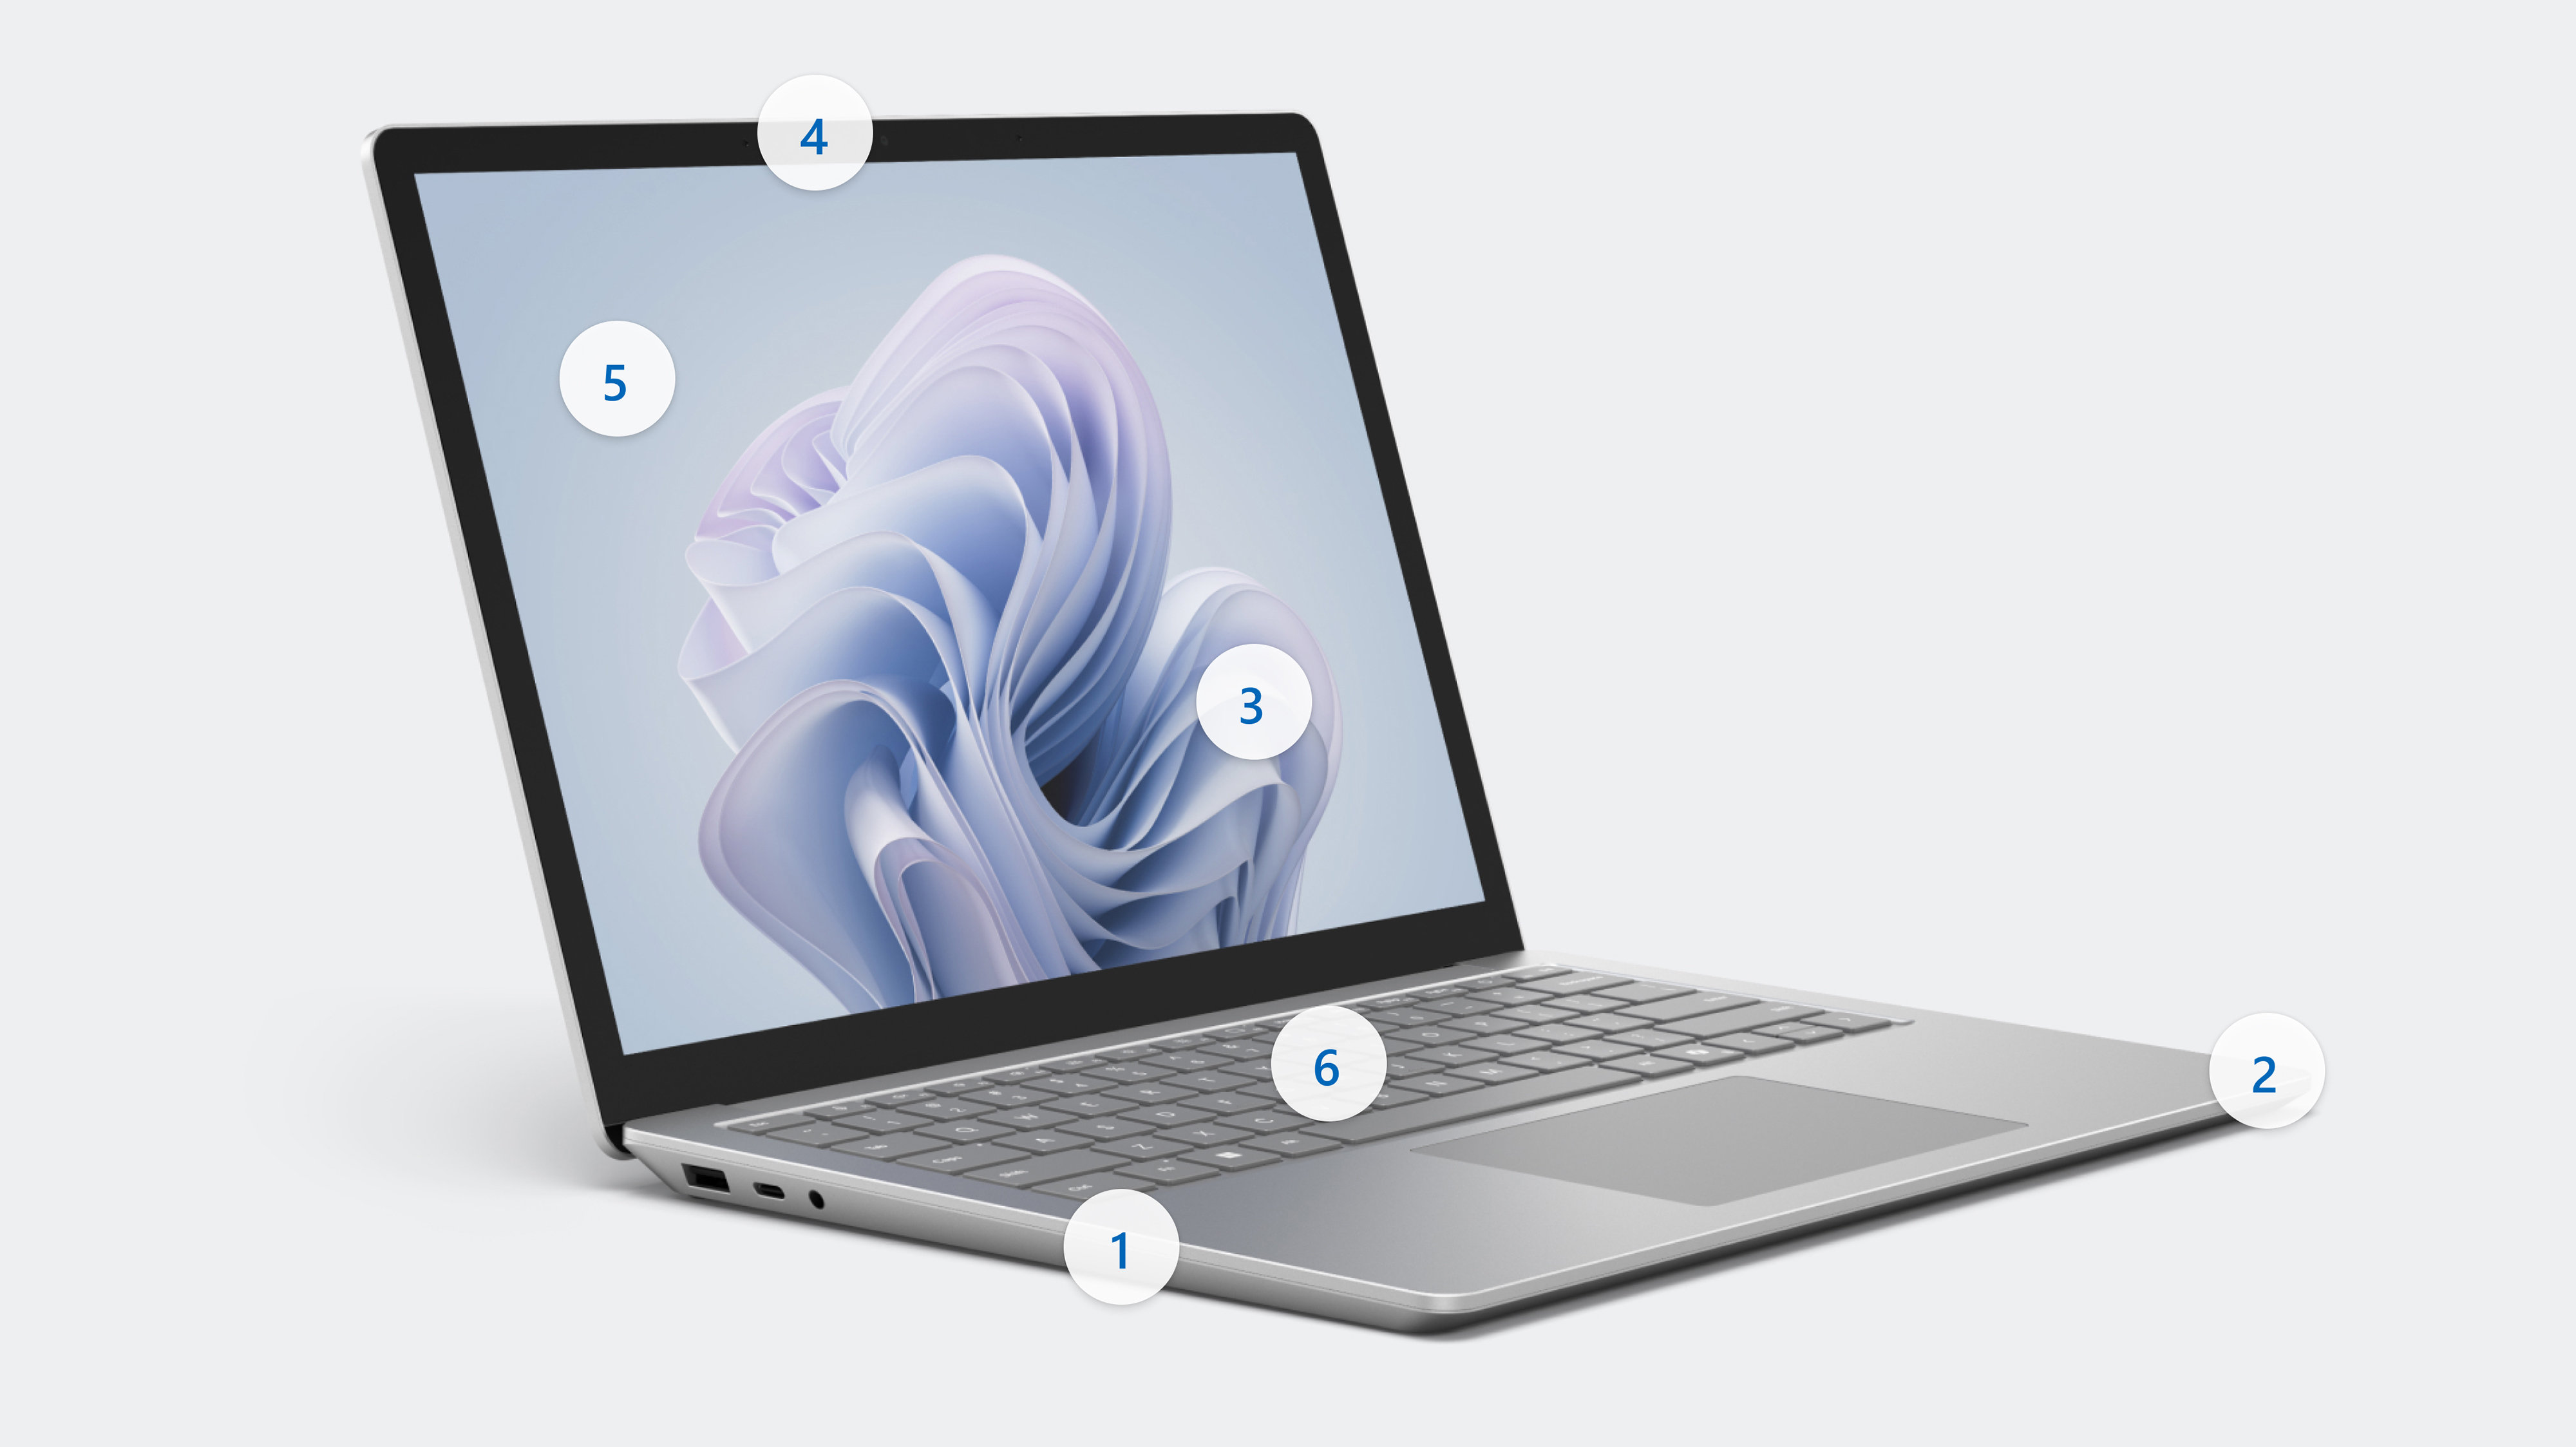 Render of Surface Laptop 6 displaying hotspots 1 to 6